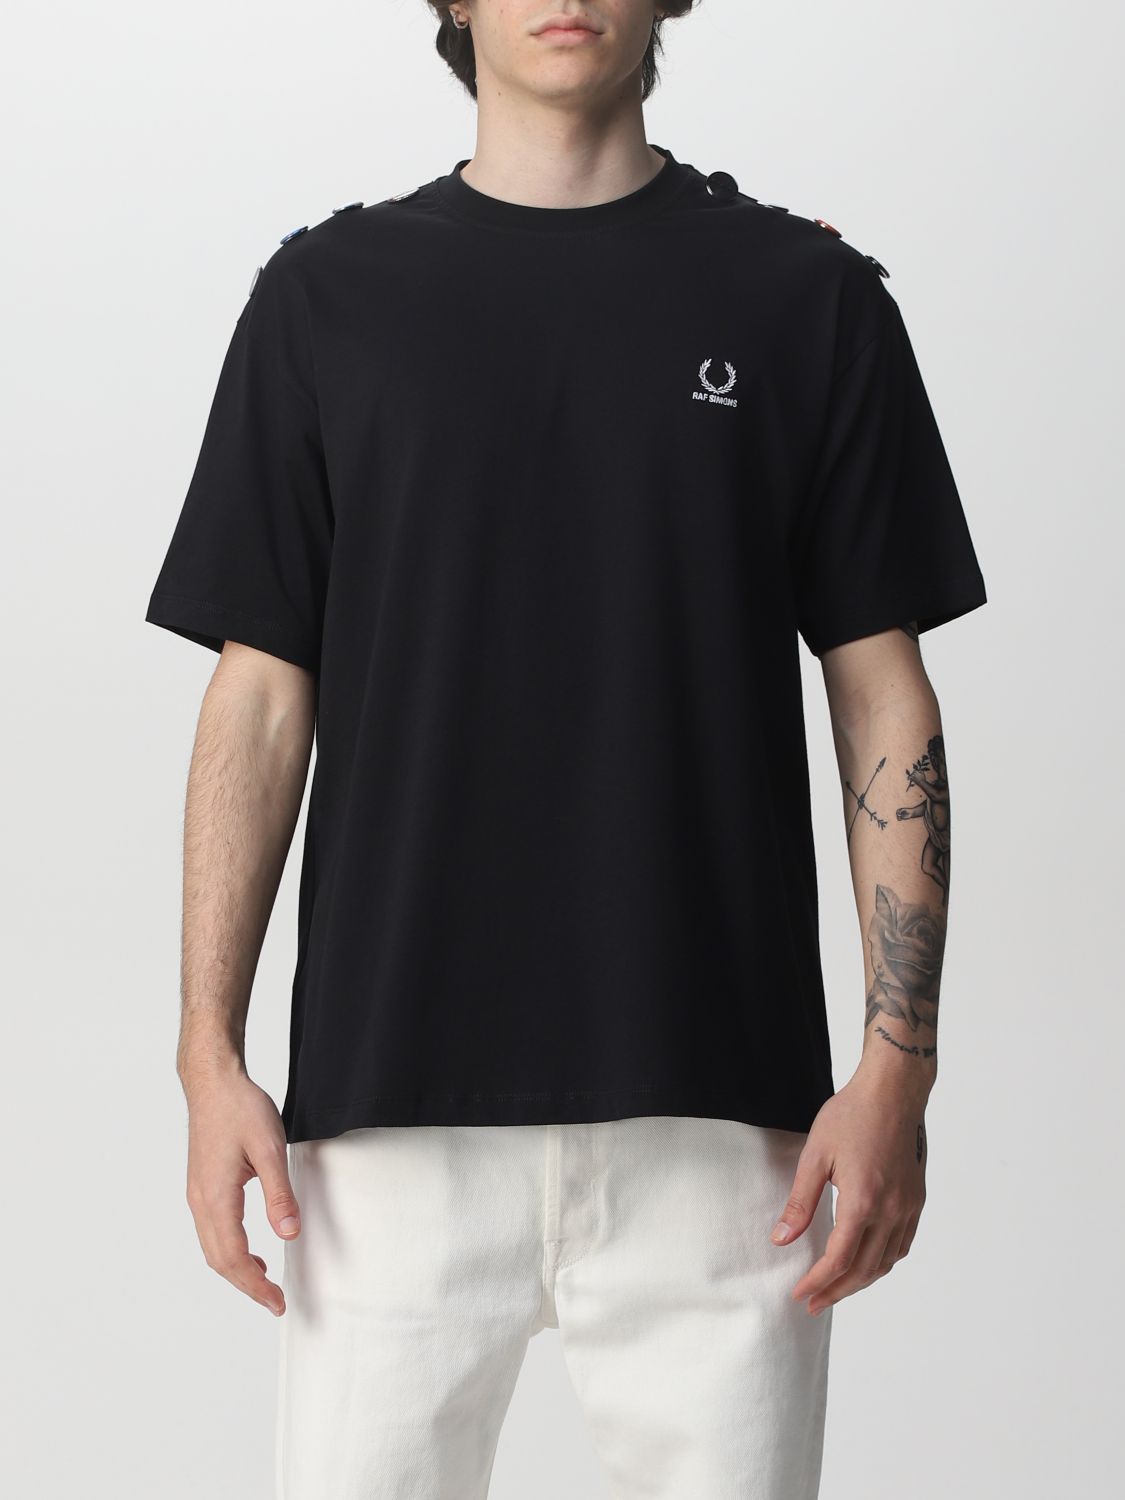 T-Shirt Fred Perry By Raf Simons: Fred Perry By Raf Simons Herren T-Shirt schwarz 1